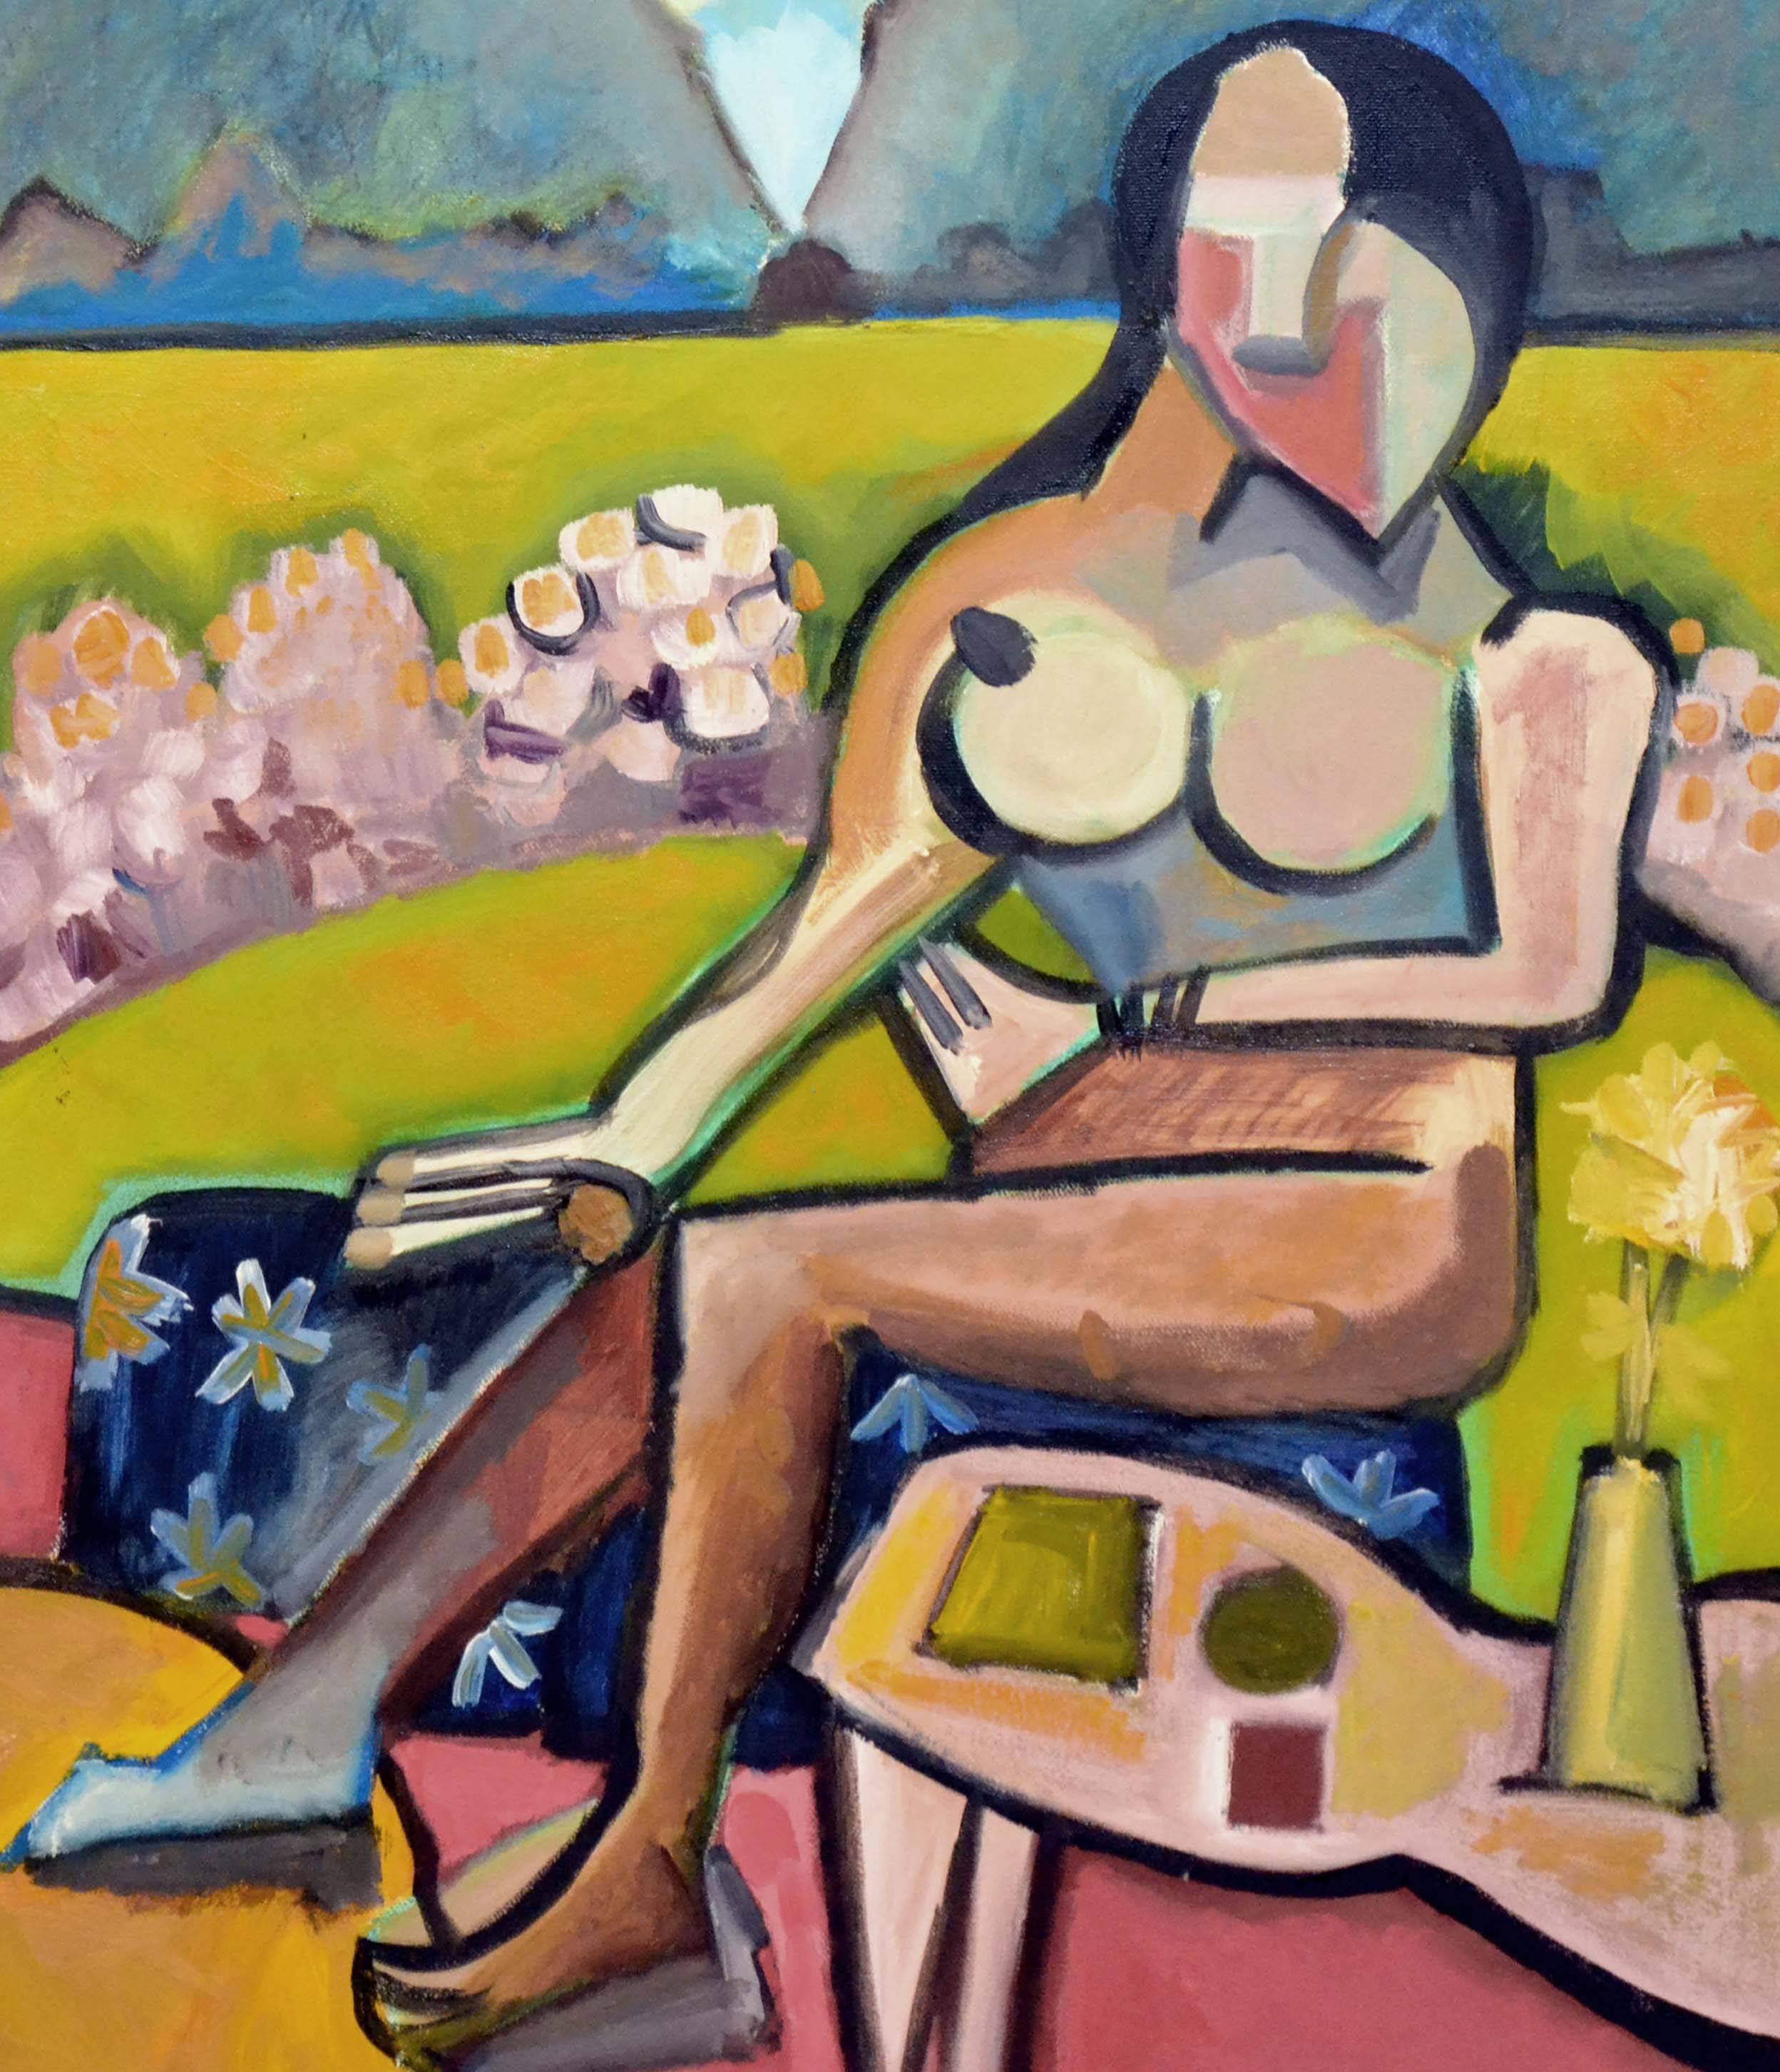 Contemporary Cubist Figurative Landscape, Modernist Nude in the Garden - Painting by Michael Eggleston